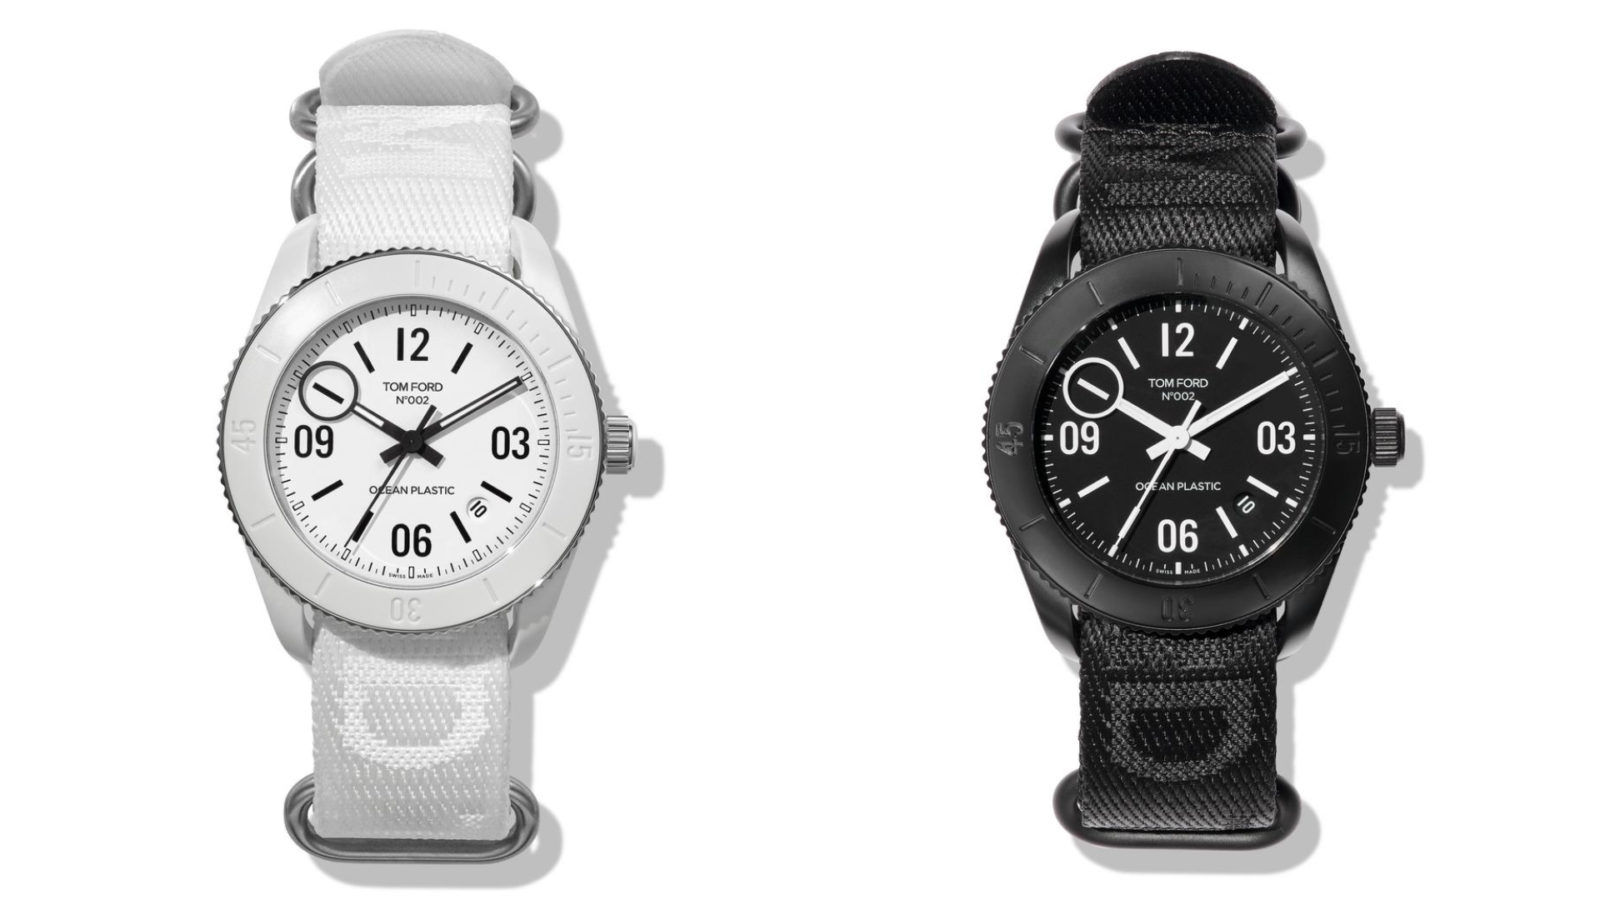 A Look at Tom Ford’s Ocean Plastic Sport Timepiece